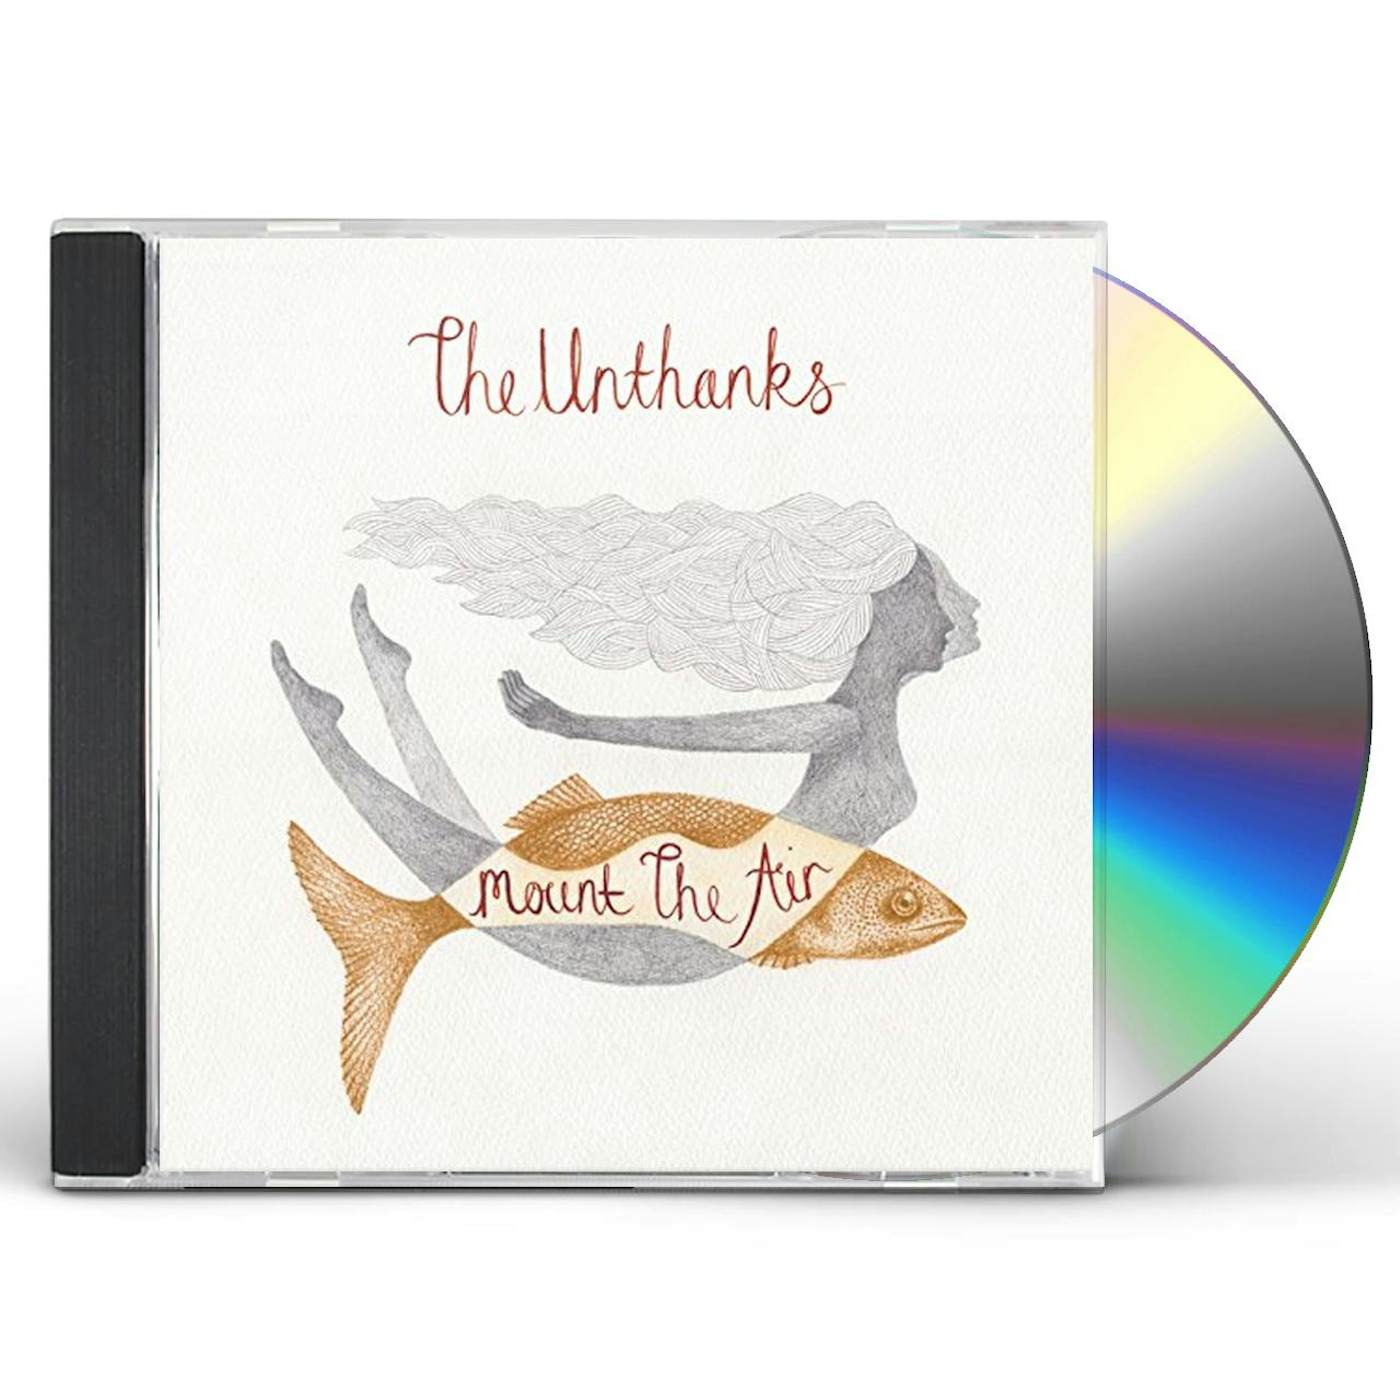 The Unthanks MOUNT THE AIR CD